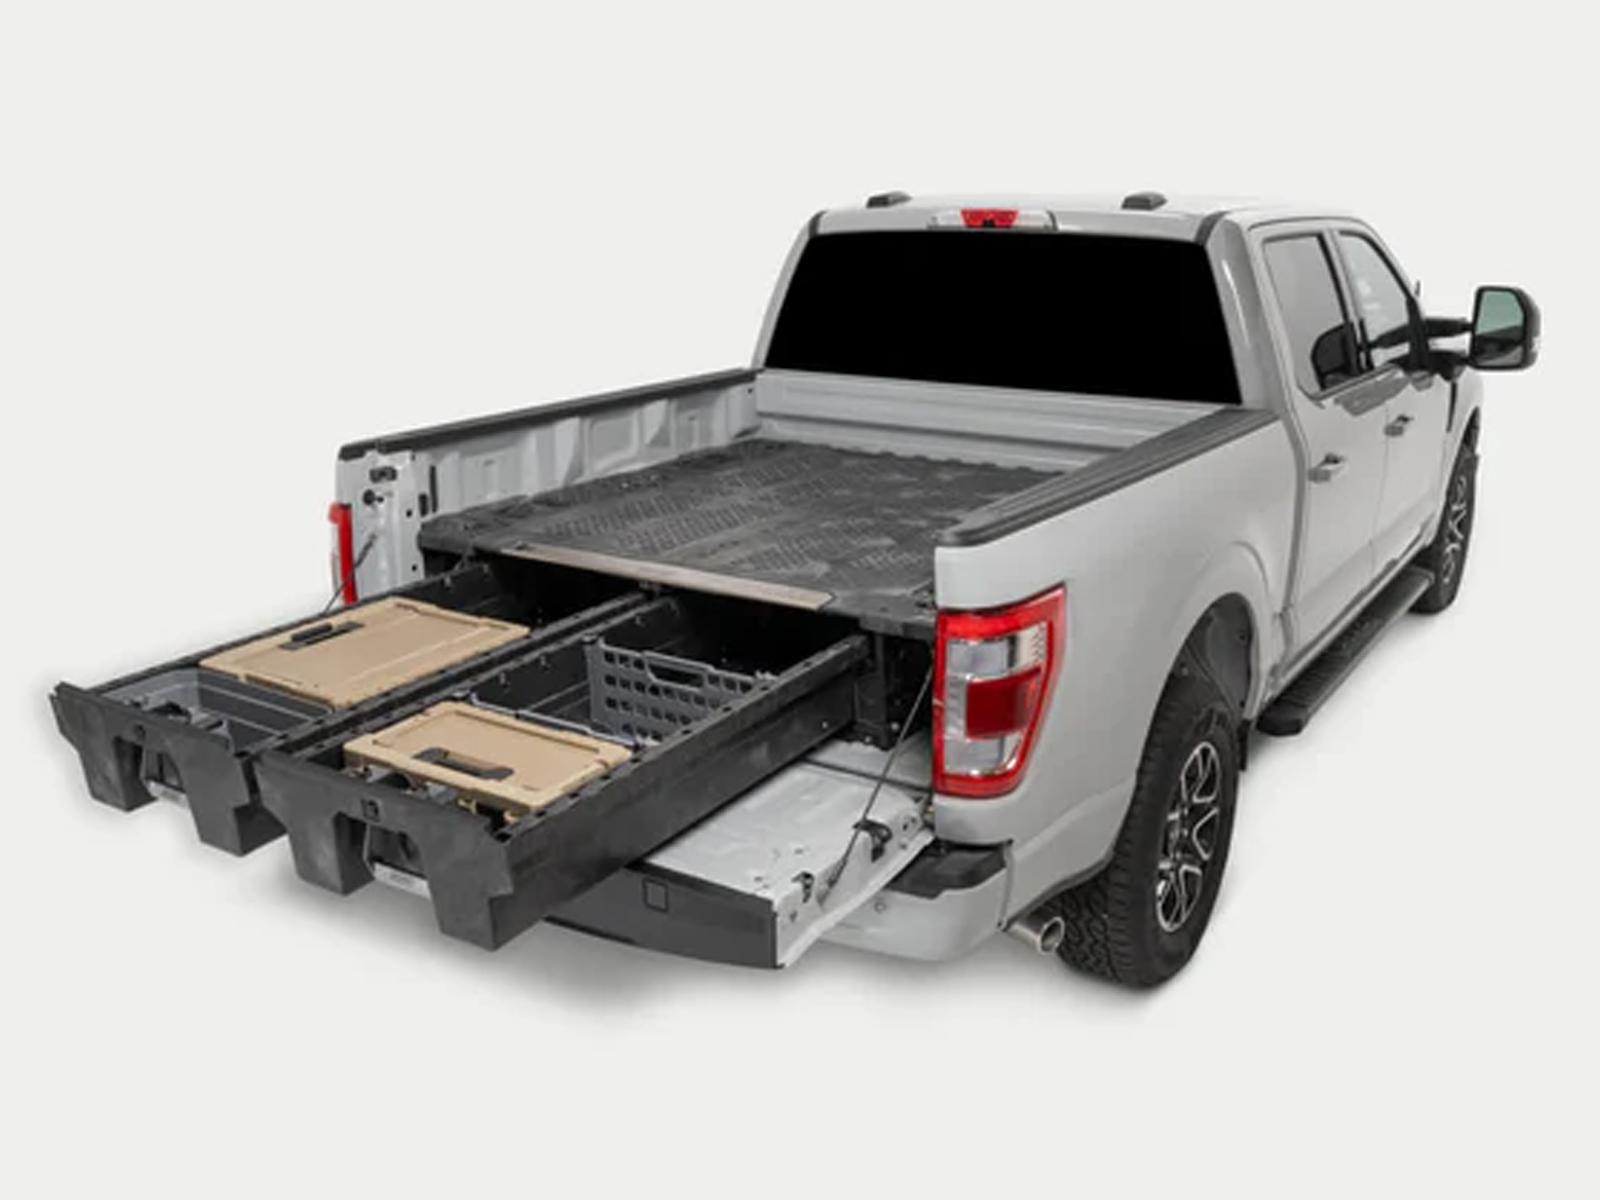 Pick up truck ladder rack w truck tool boxes and drawers - System One  integrated truck equipment: aluminum ladder racks, truck racks, van racks,  truck tool boxes